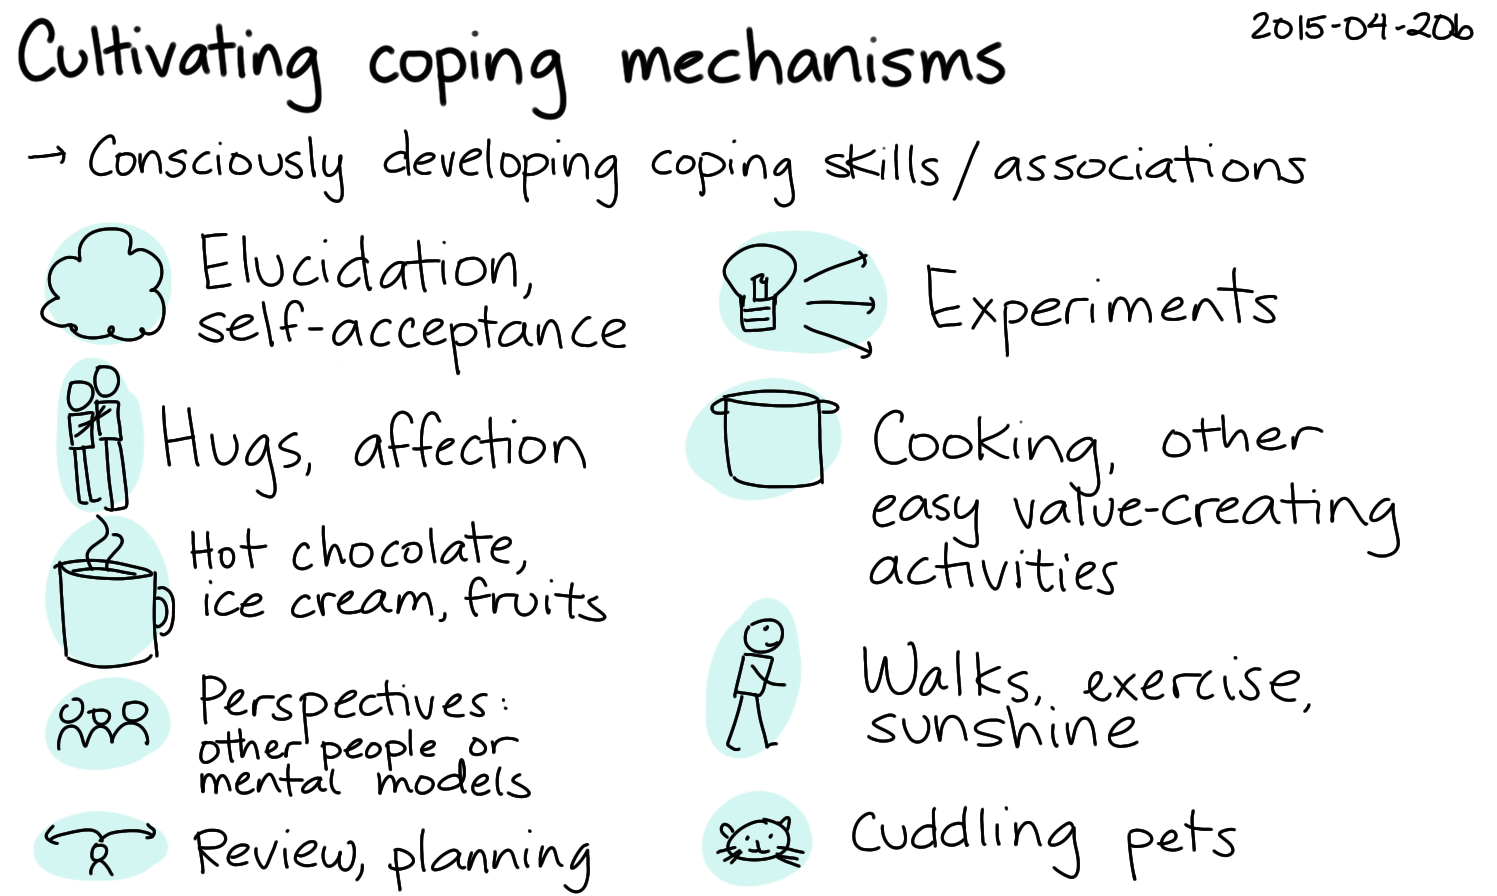 2015-04-20b Cultivating coping mechanisms -- index card #self-care #coping.png